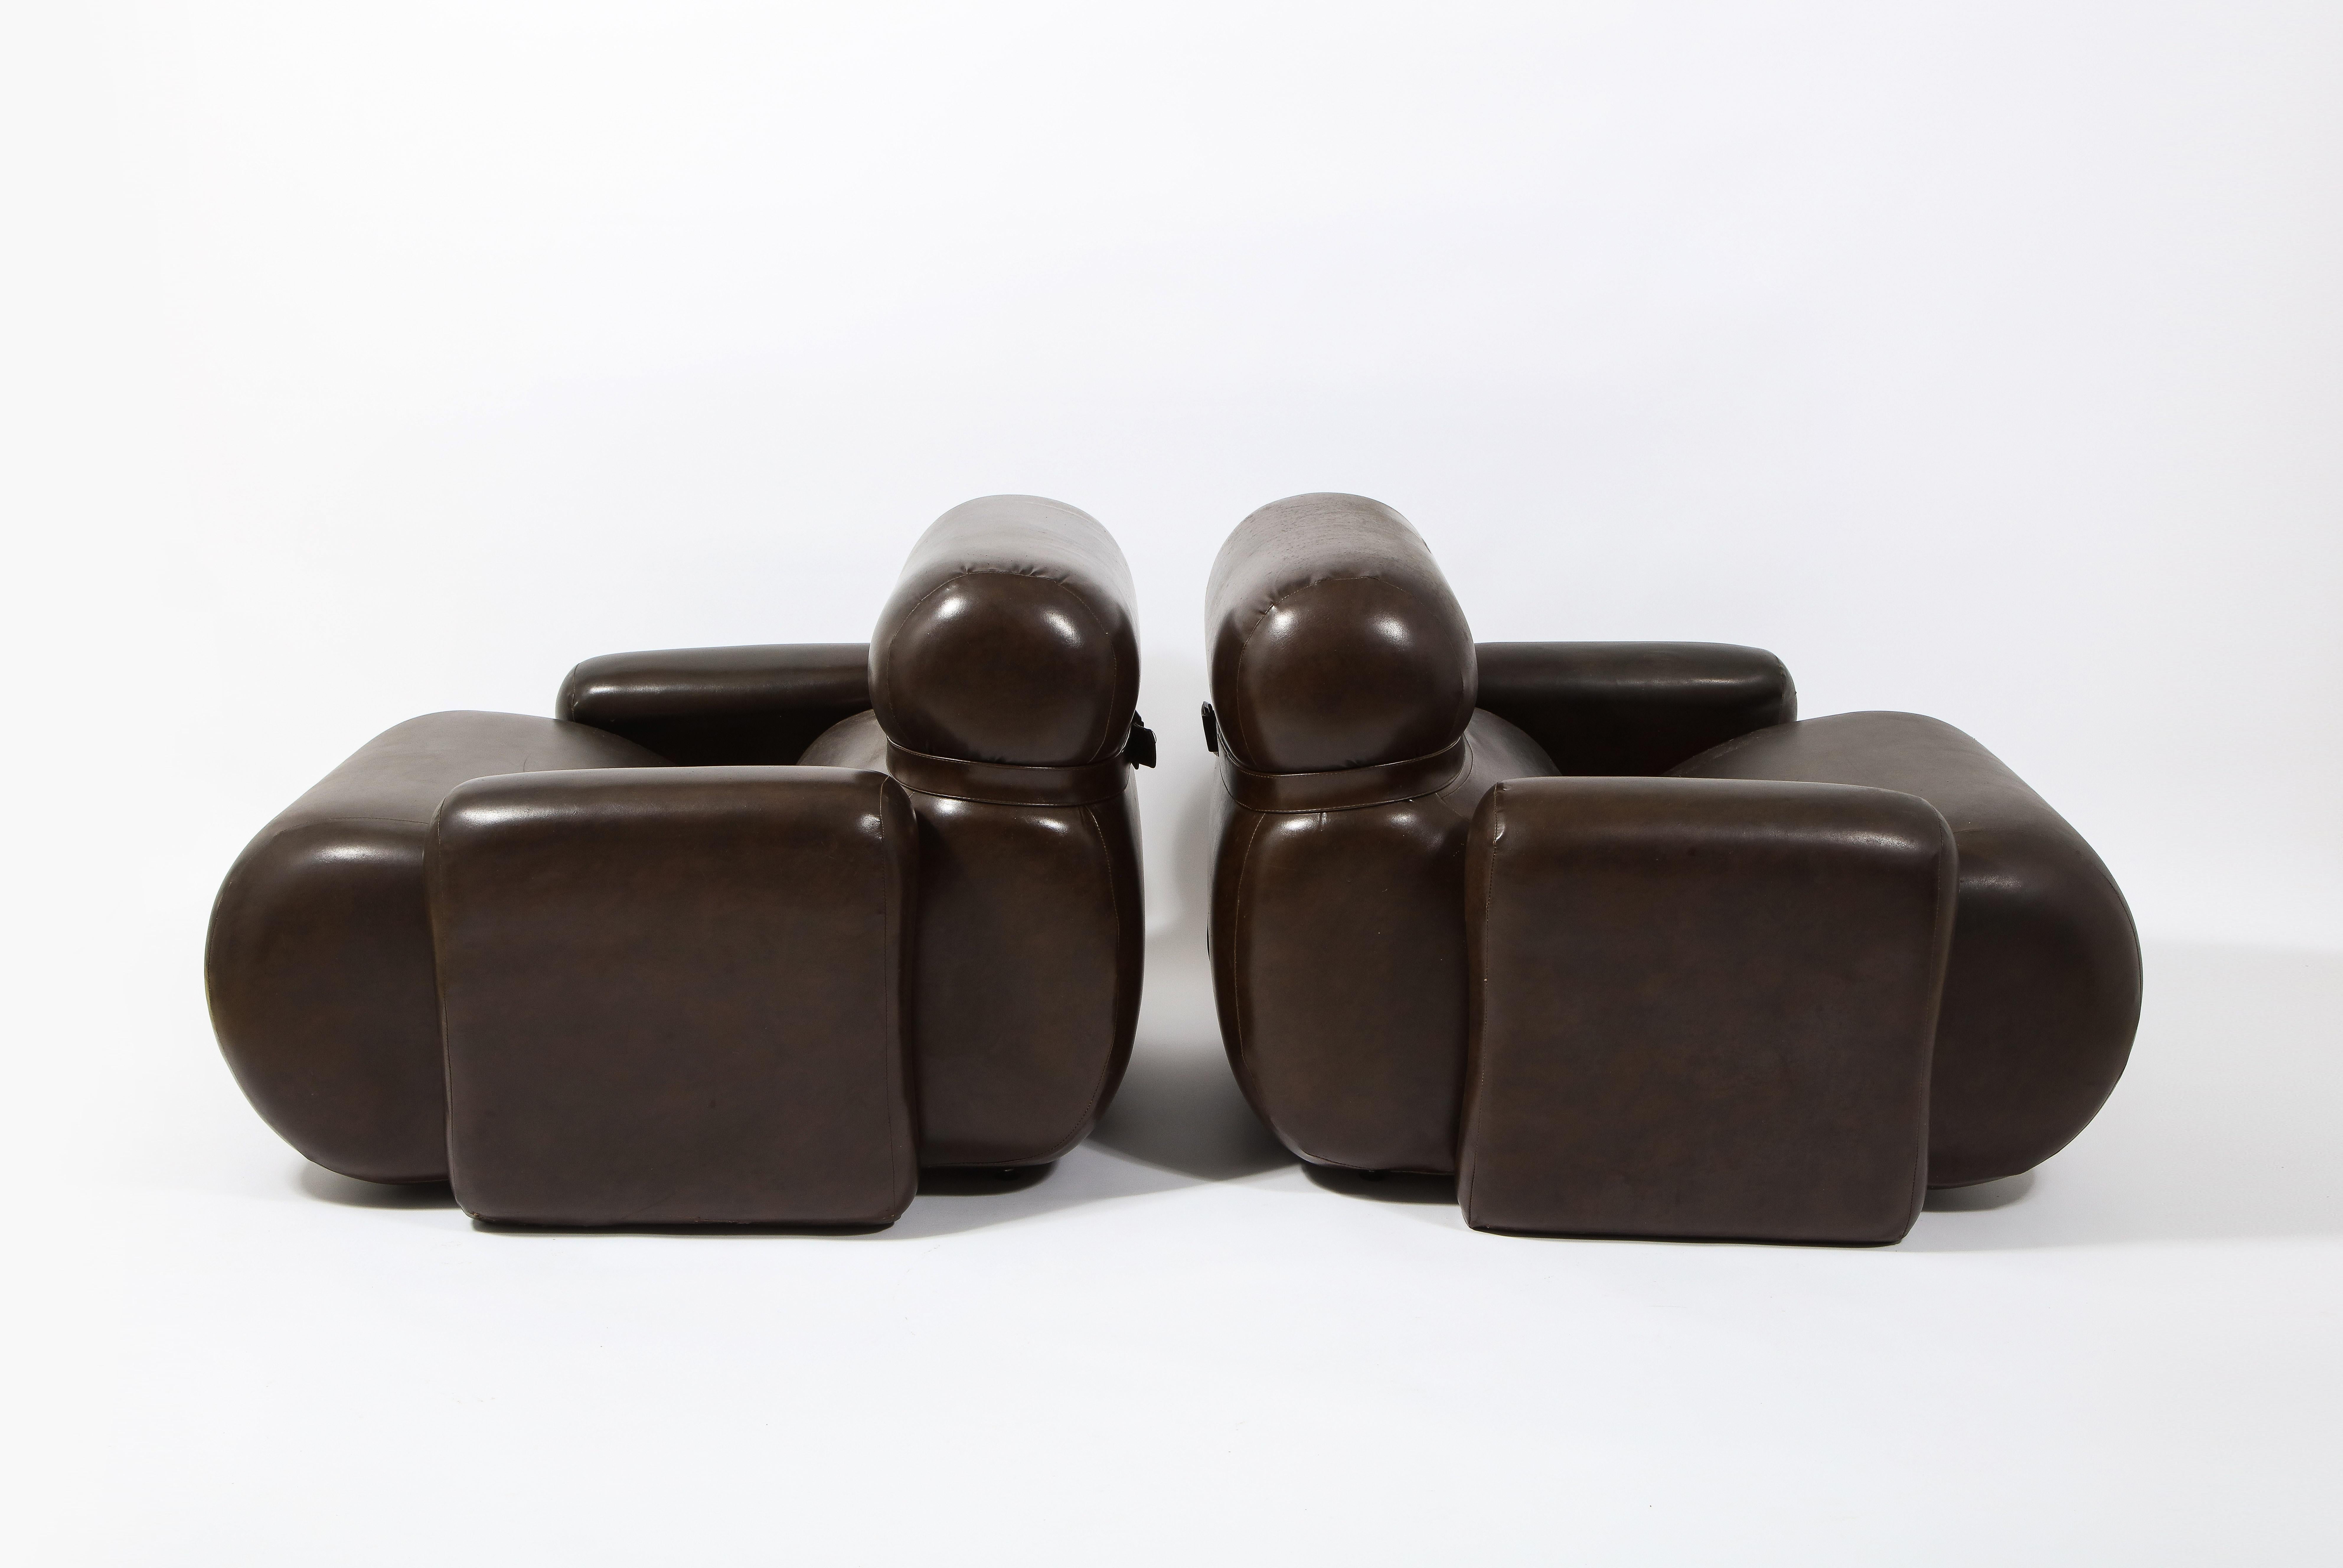 Large Space Age Lounge Chair Armchairs in Dark Brown Vinyl, France 1970's For Sale 2